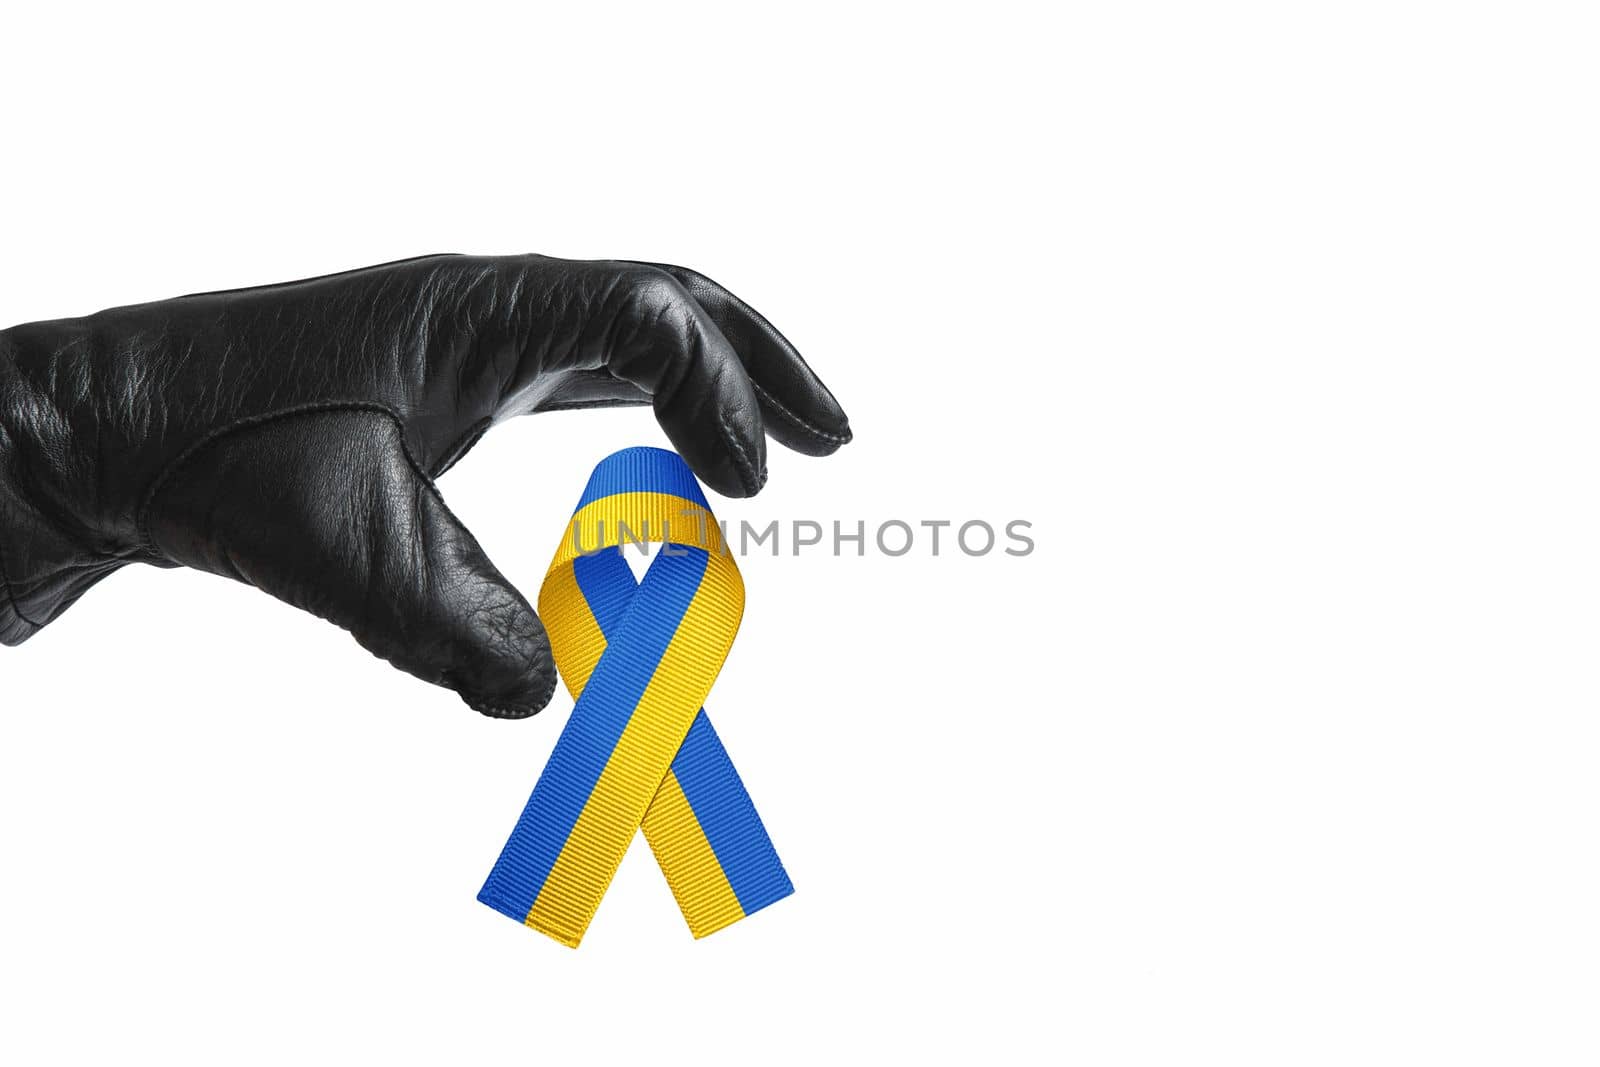 hand of terror in black leather glove reaches out to seize the symbol of freedom of ukraine. concept needs help and support, truth will win